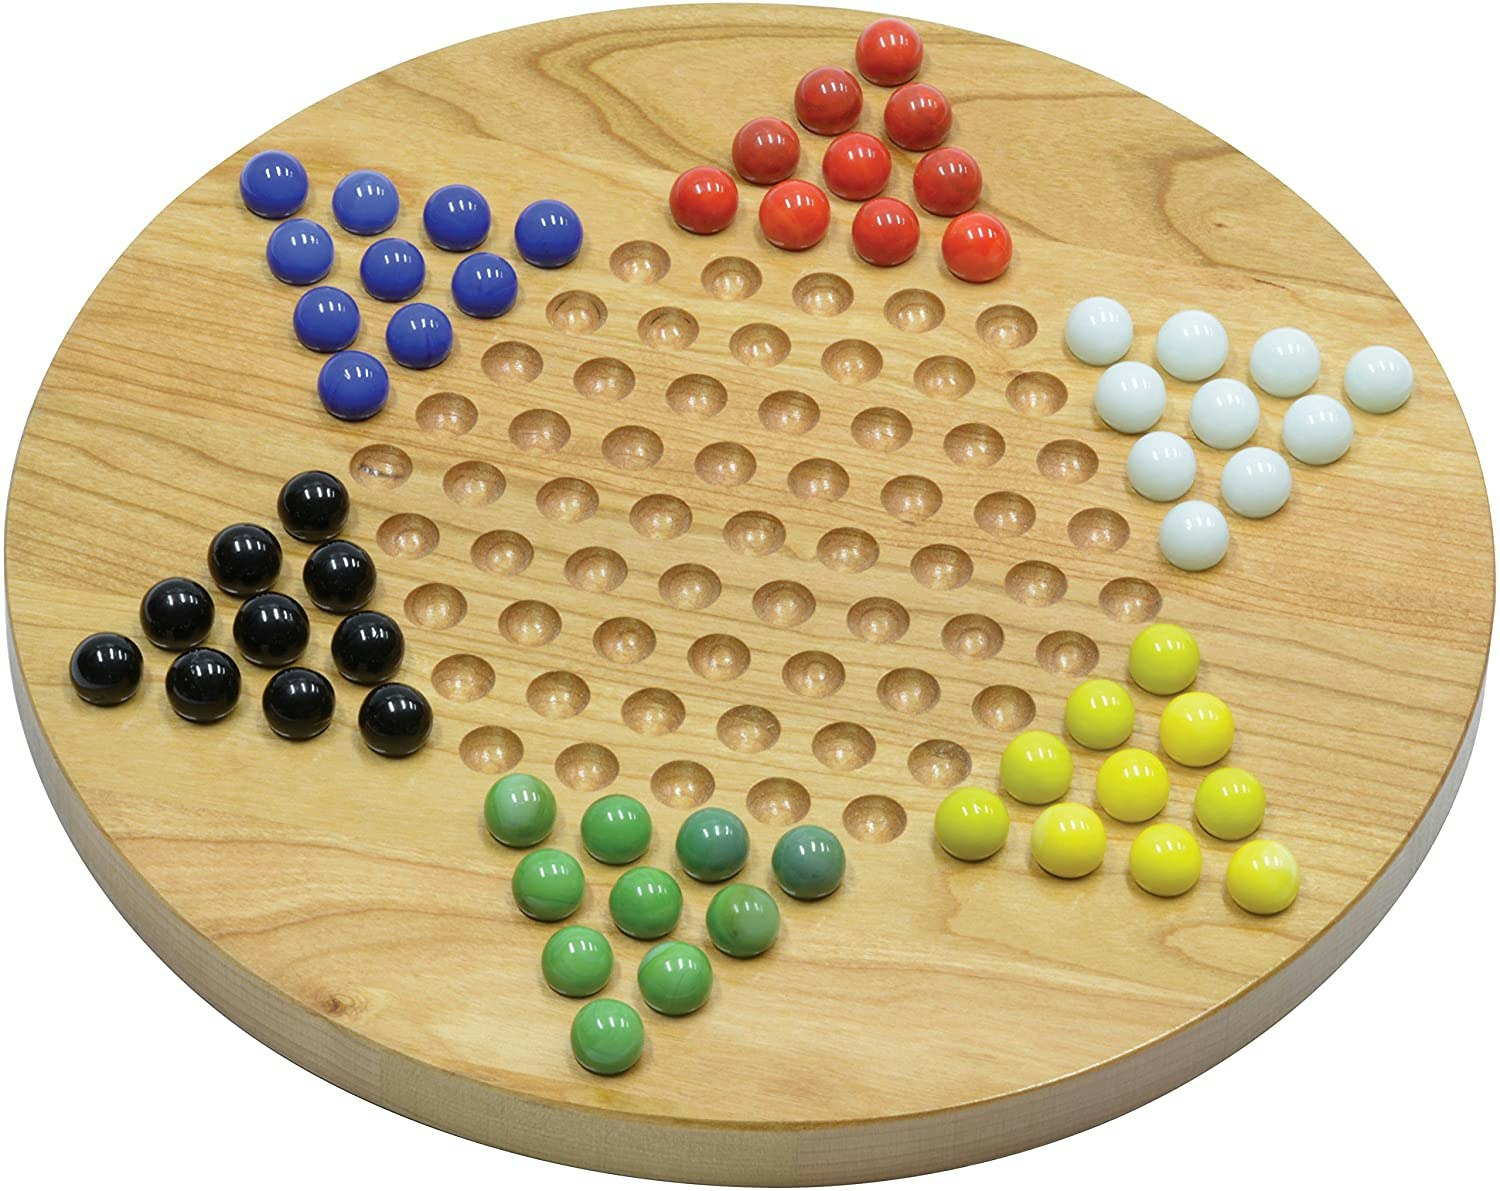 play chinese checkers online